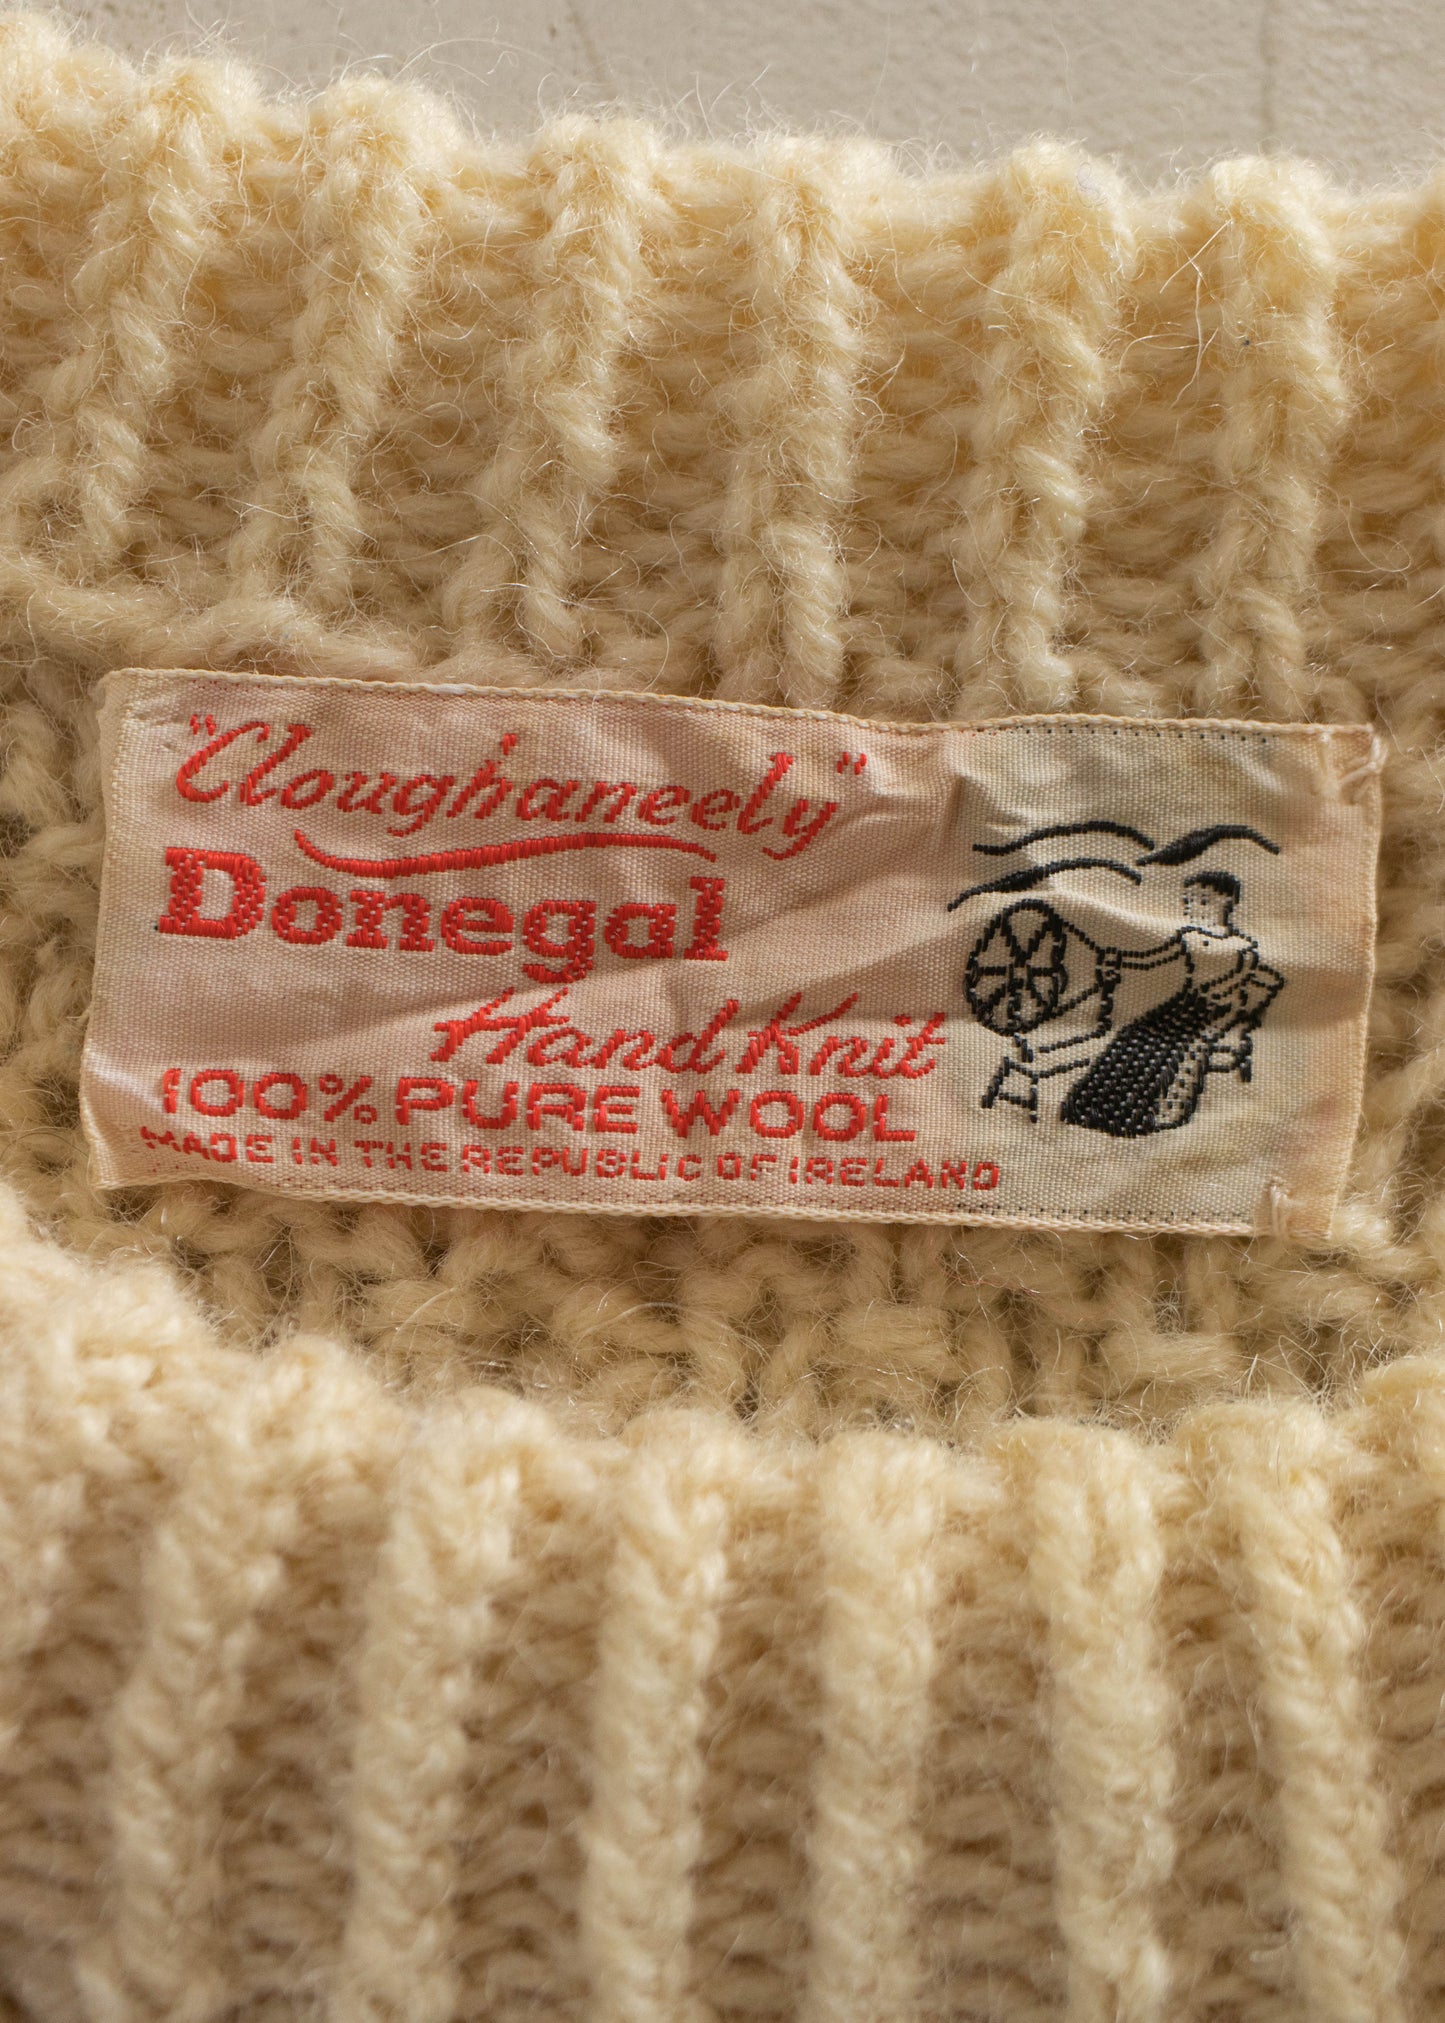 1980s Cloughhaneely Donegal Cable Knit Wool Fisherman Sweater Size L/XL